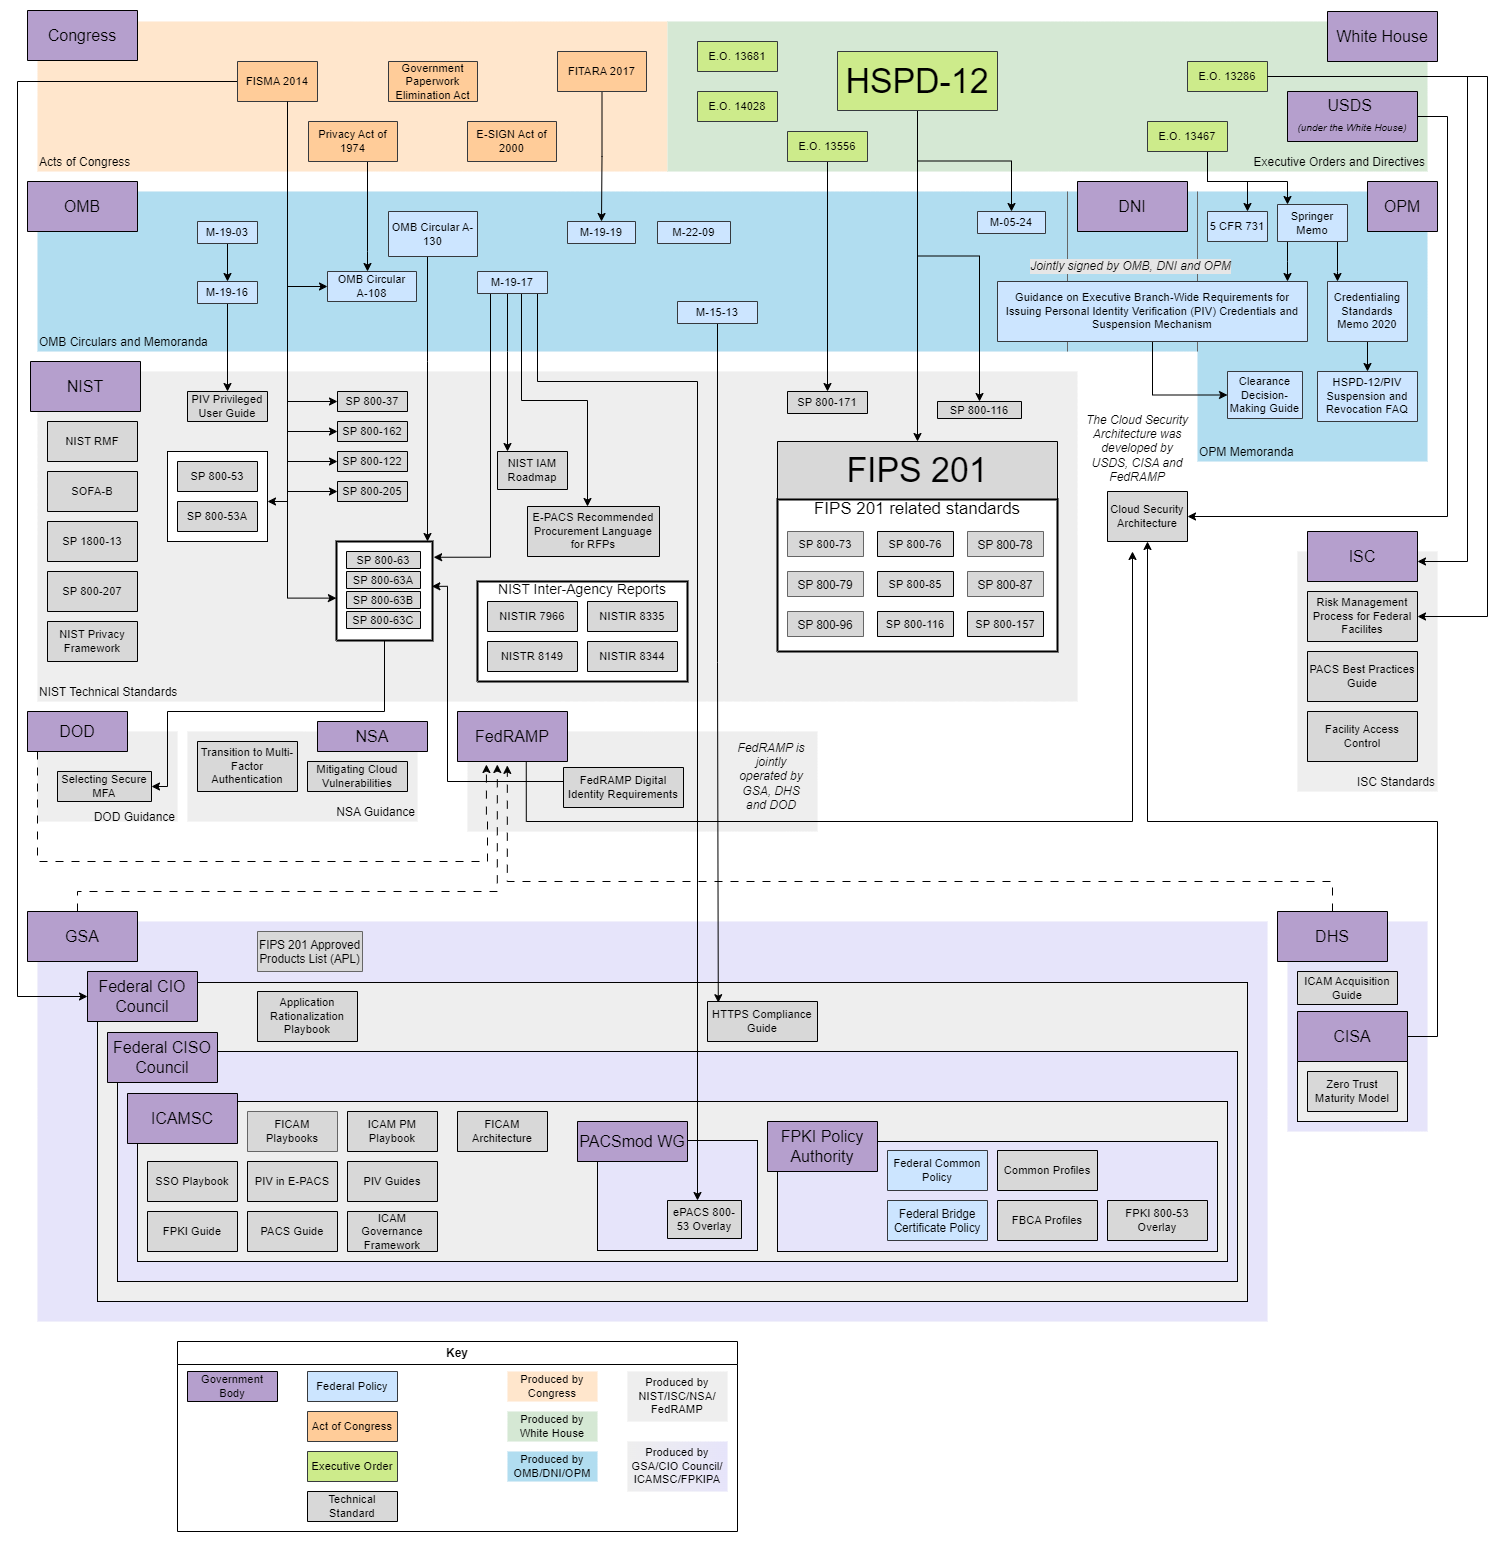 Visual overview of the laws, policies and standards relevant to FICAM, organized according to the government body that produced it. The relationships between the documents are illustrated by arrows connecting them.